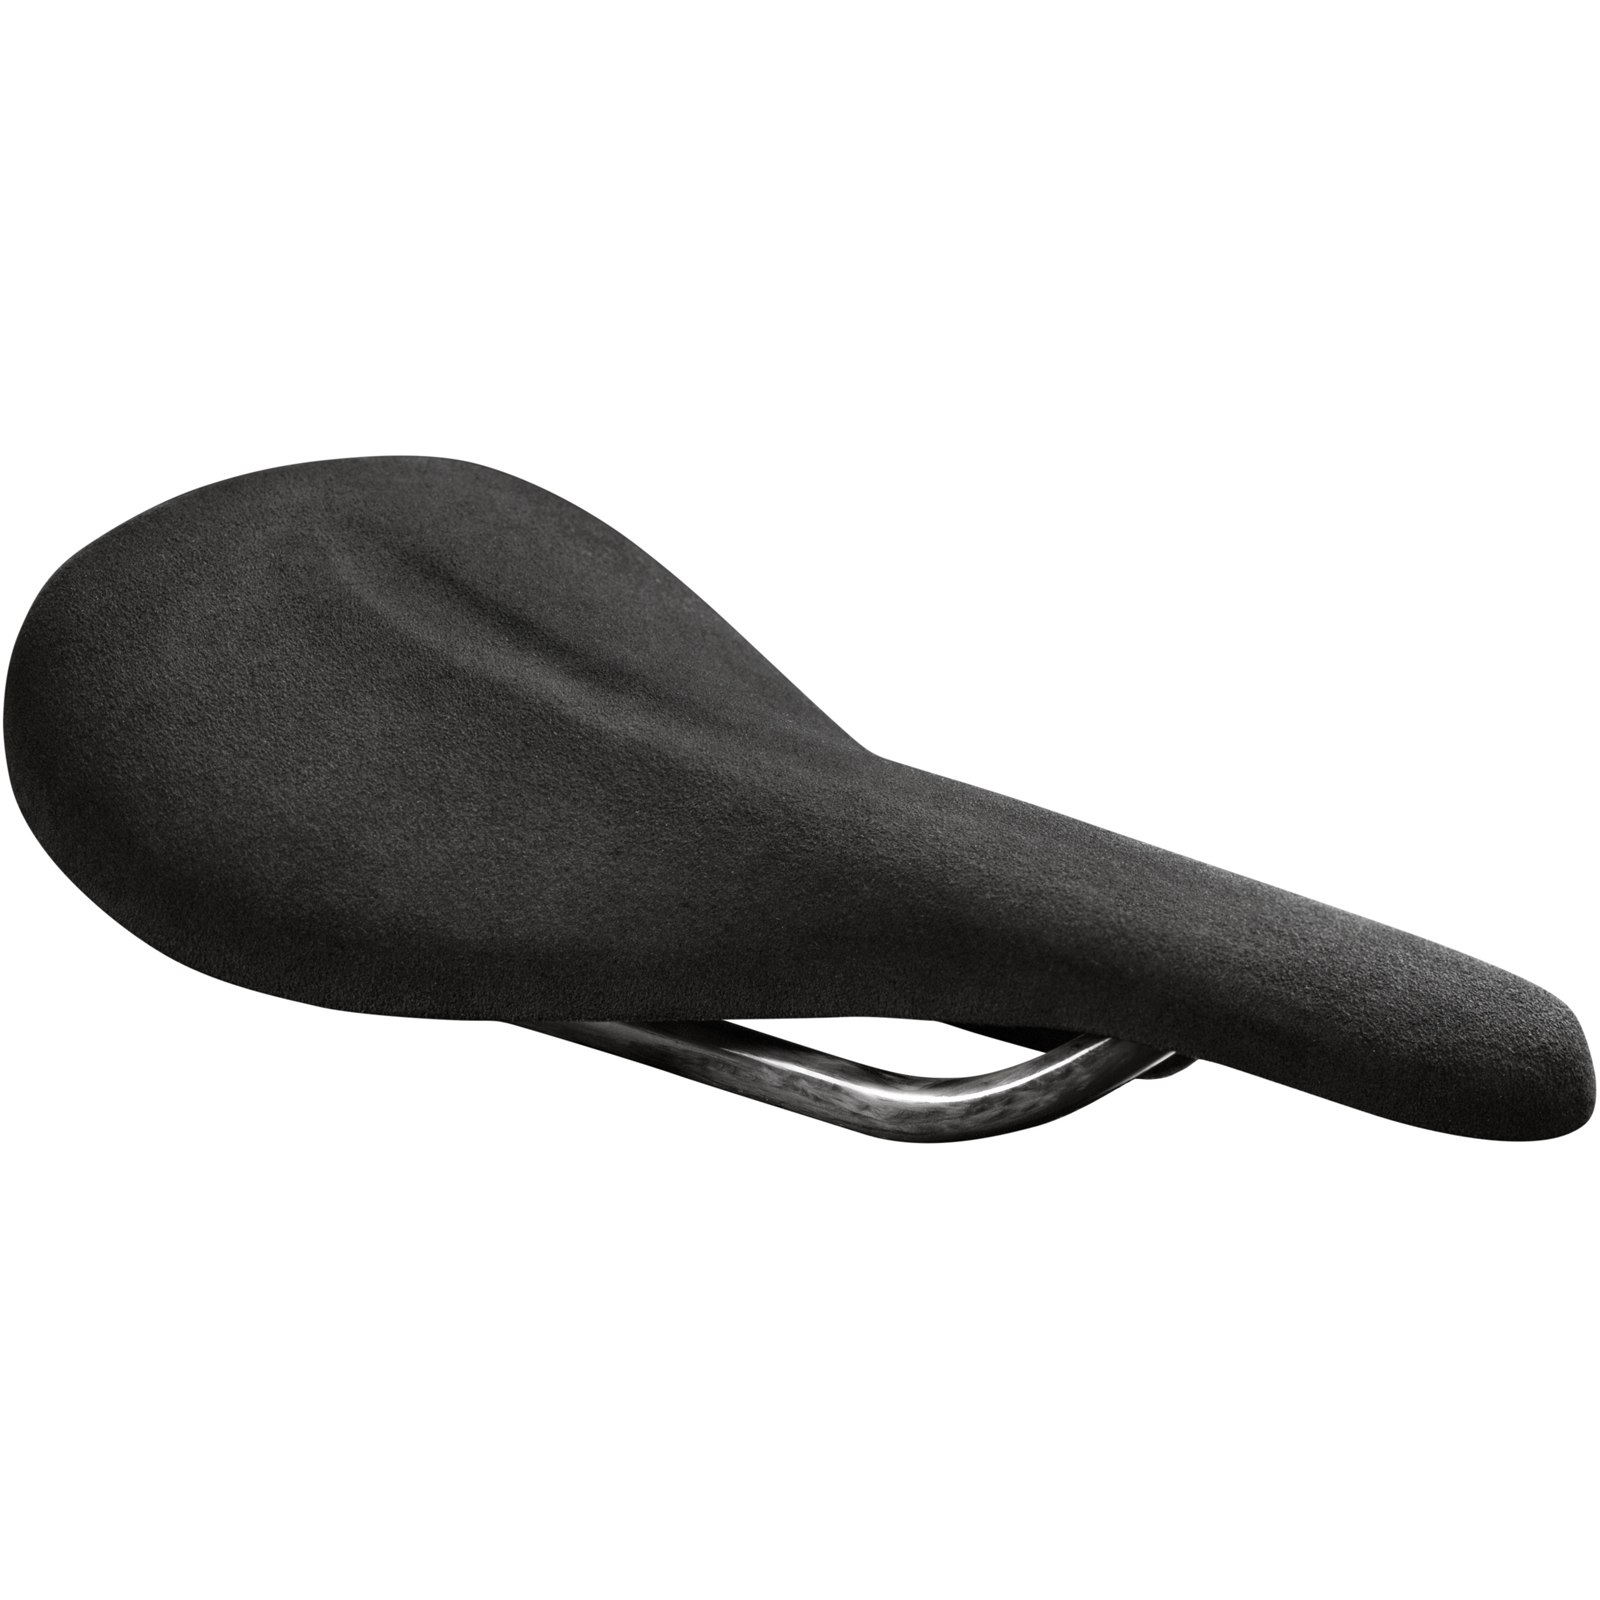 Picture of Beast Components Grip Carbon Saddle - Alcantara - 130mm, black